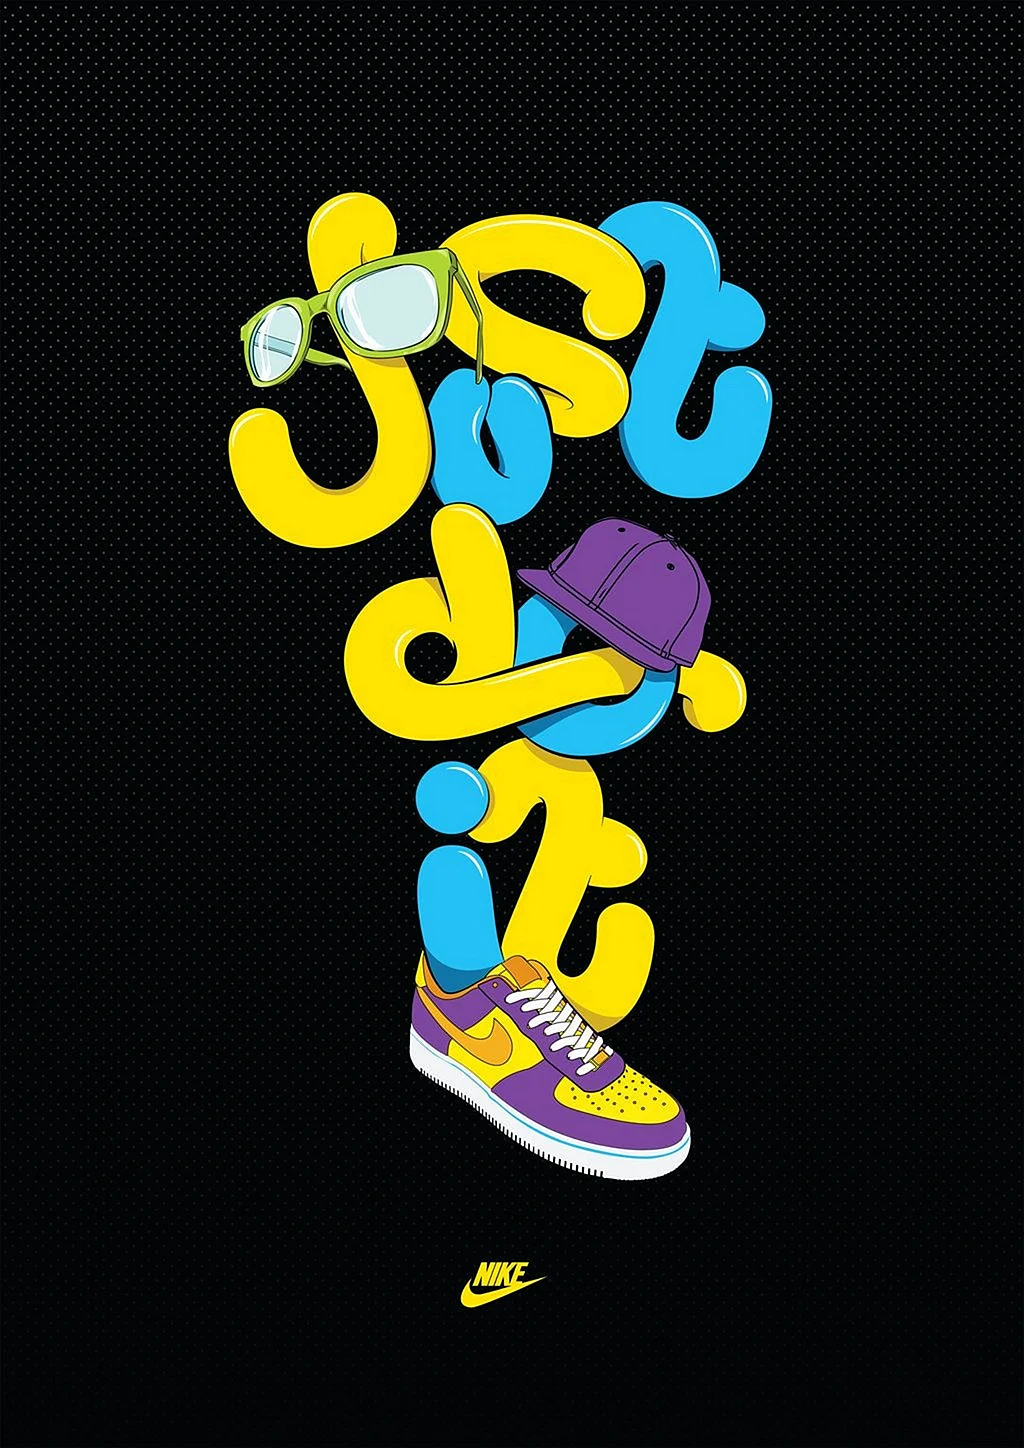 Just Do It Wallpaper For iPhone